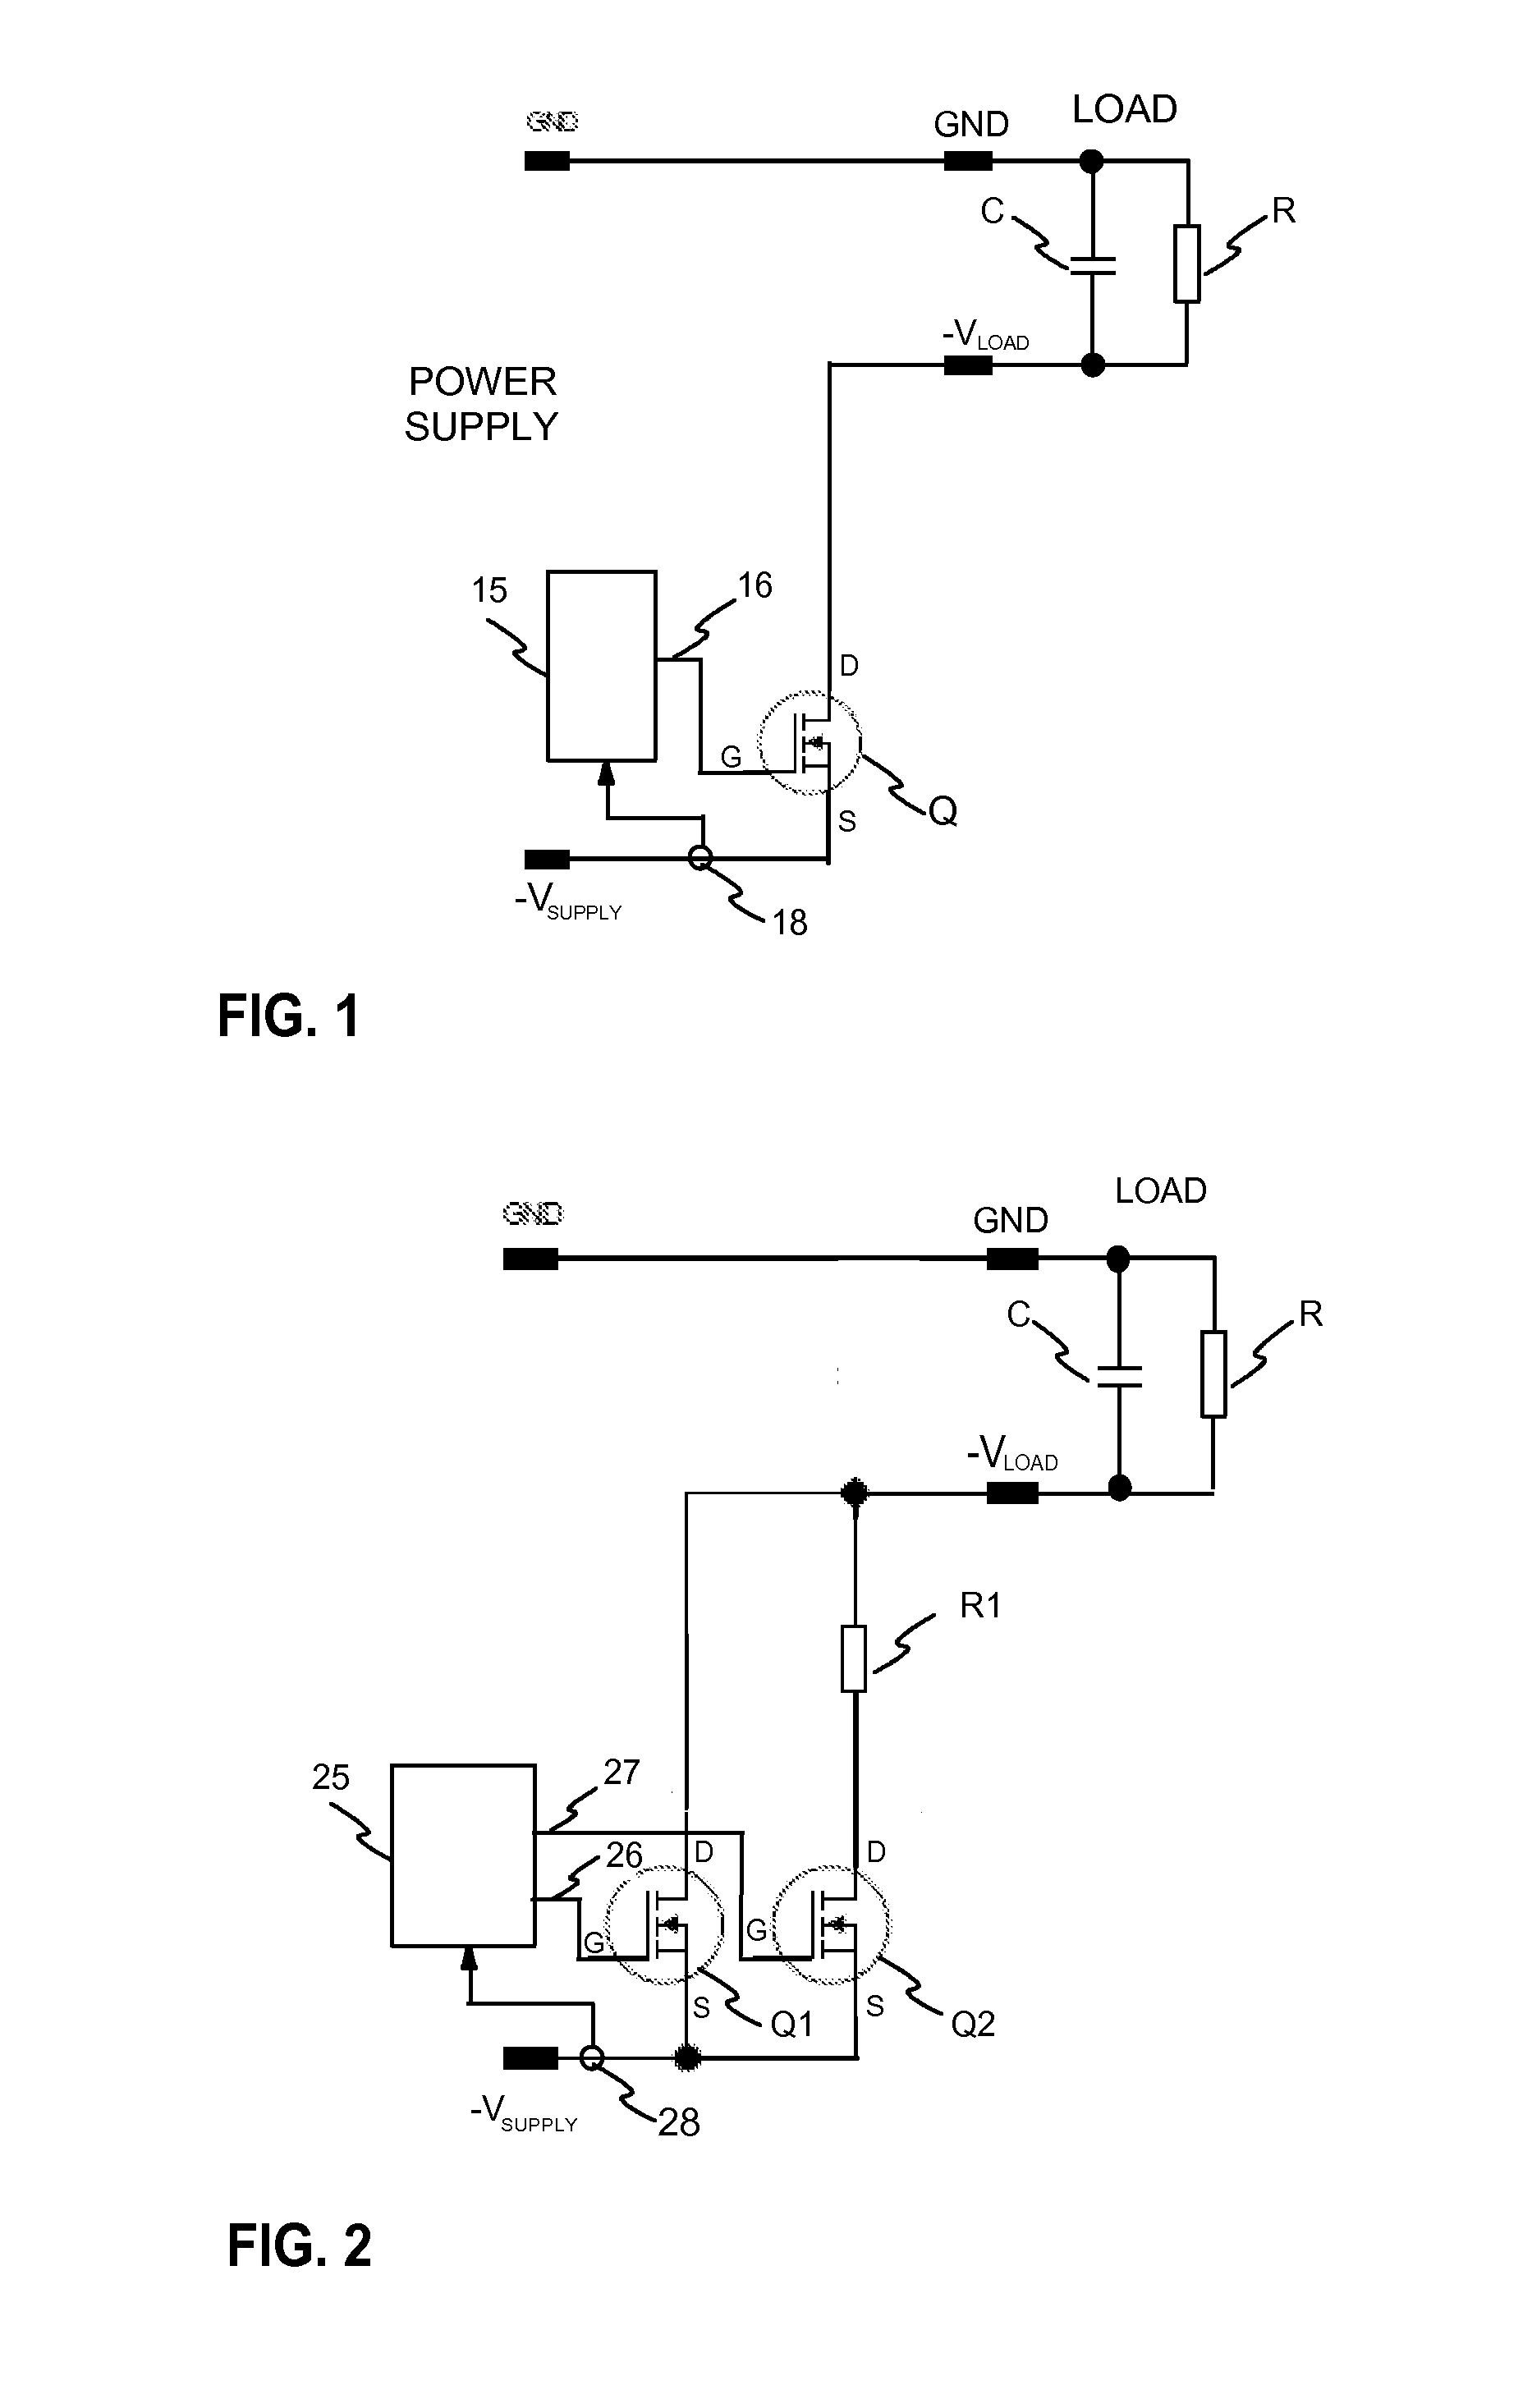 Circuit, method and system for overload protection